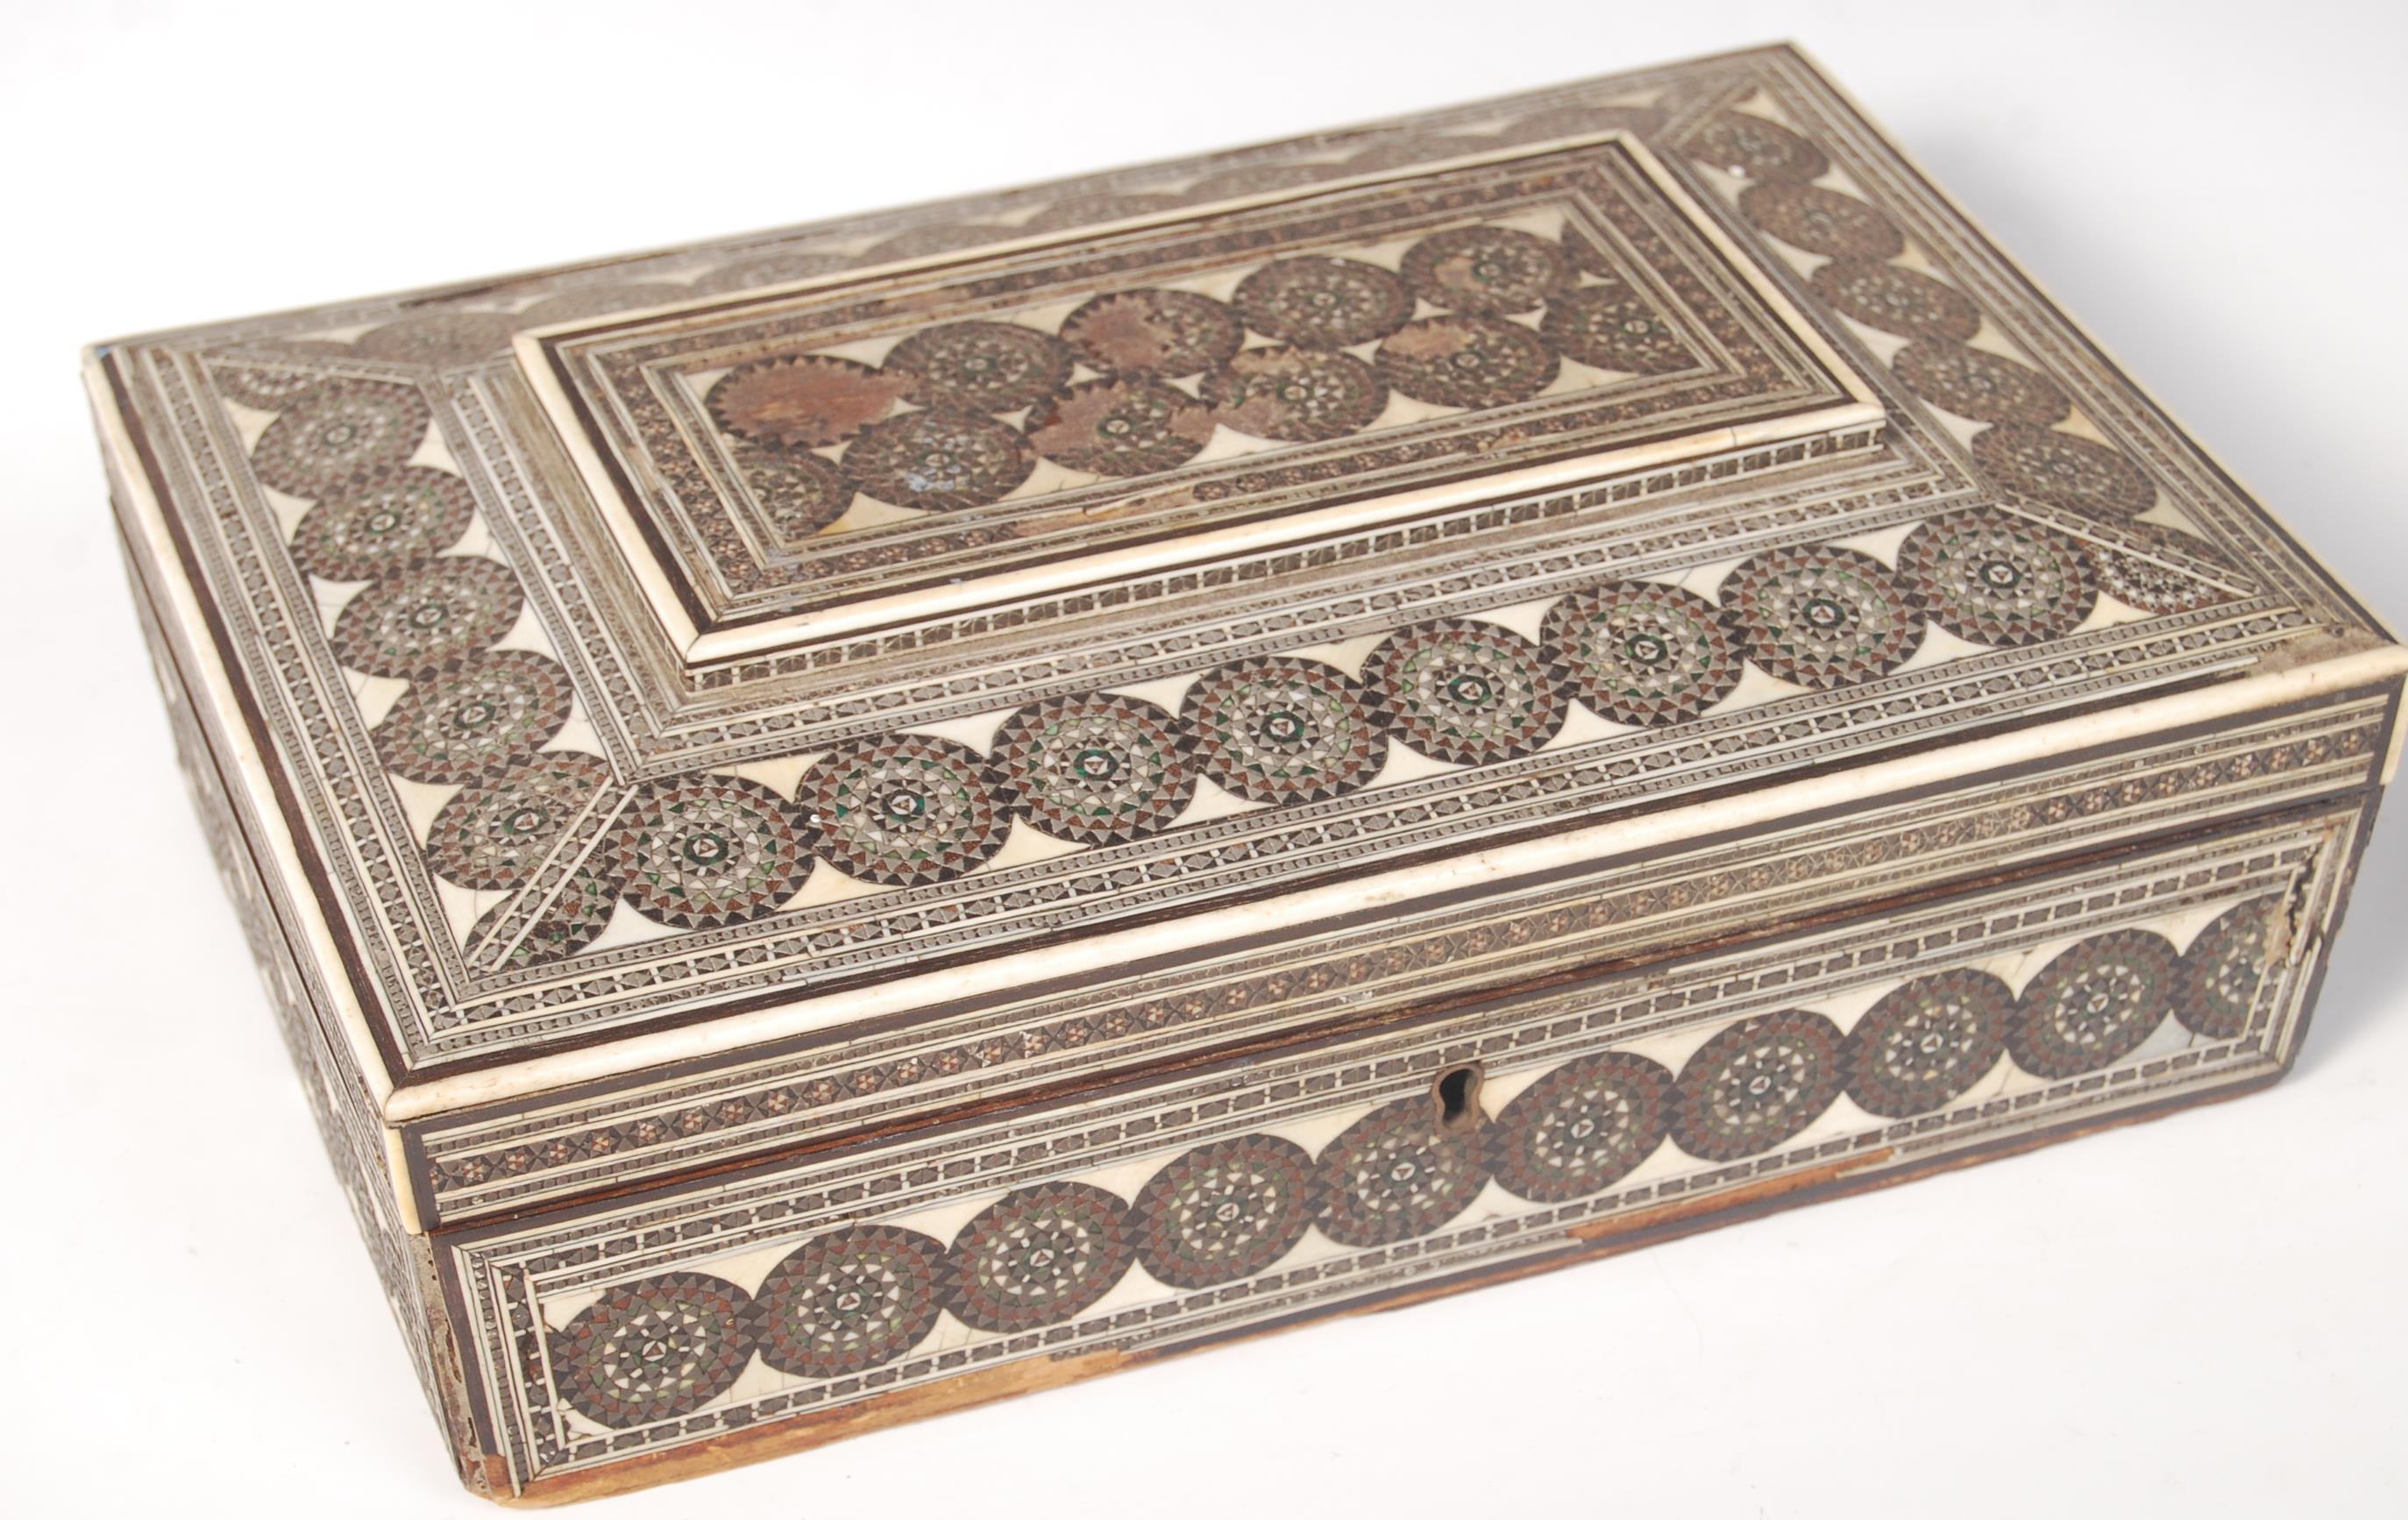 TWO 19TH CENTURY ANGLO INDIAN VIZAGAPATAM BOXES - Image 2 of 4